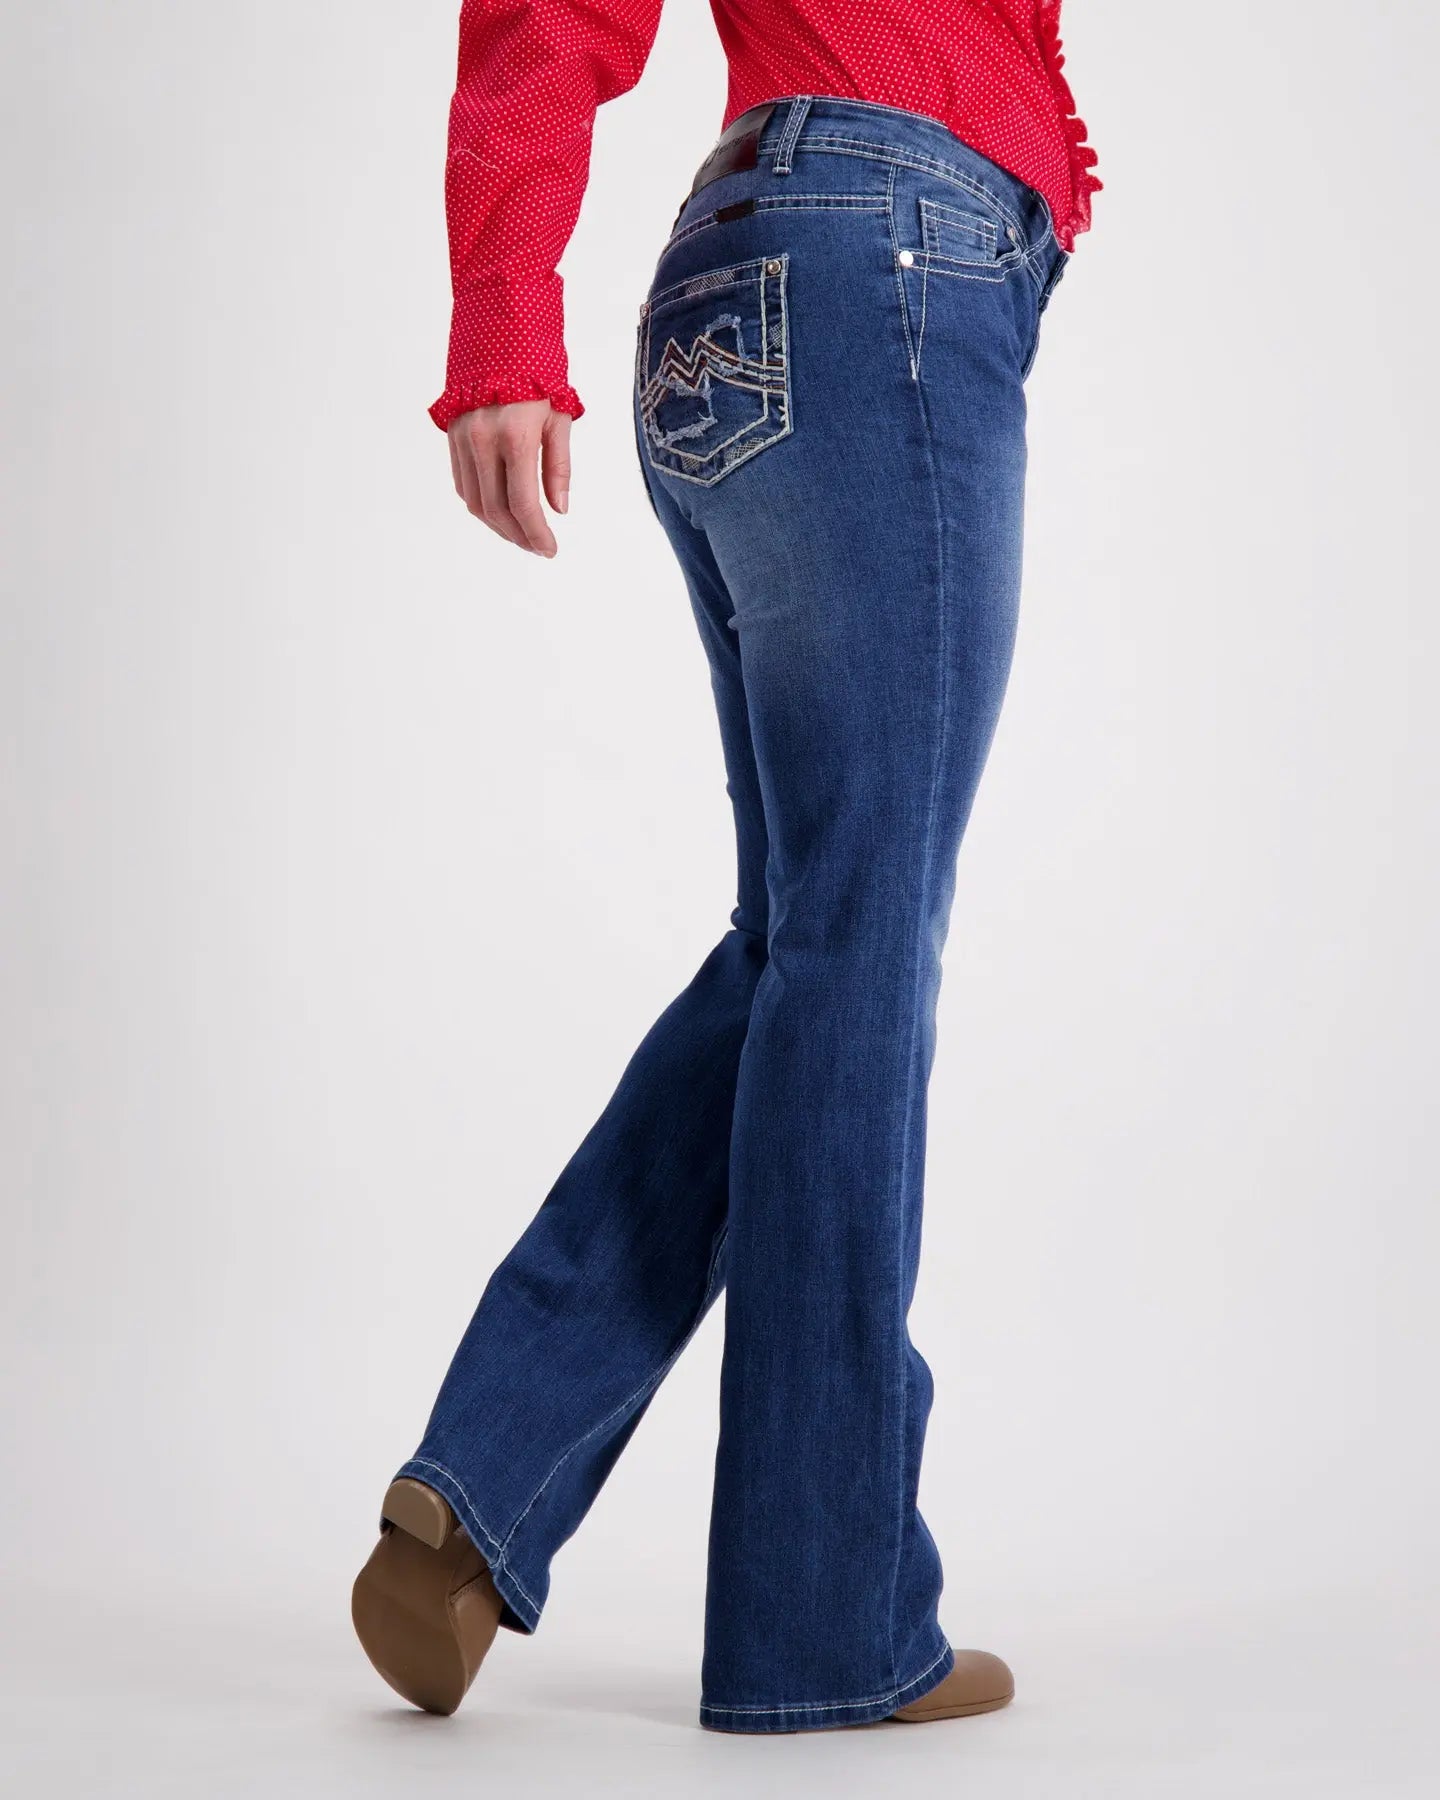 Sierra Boot-Cut Jeans Outback Supply Co